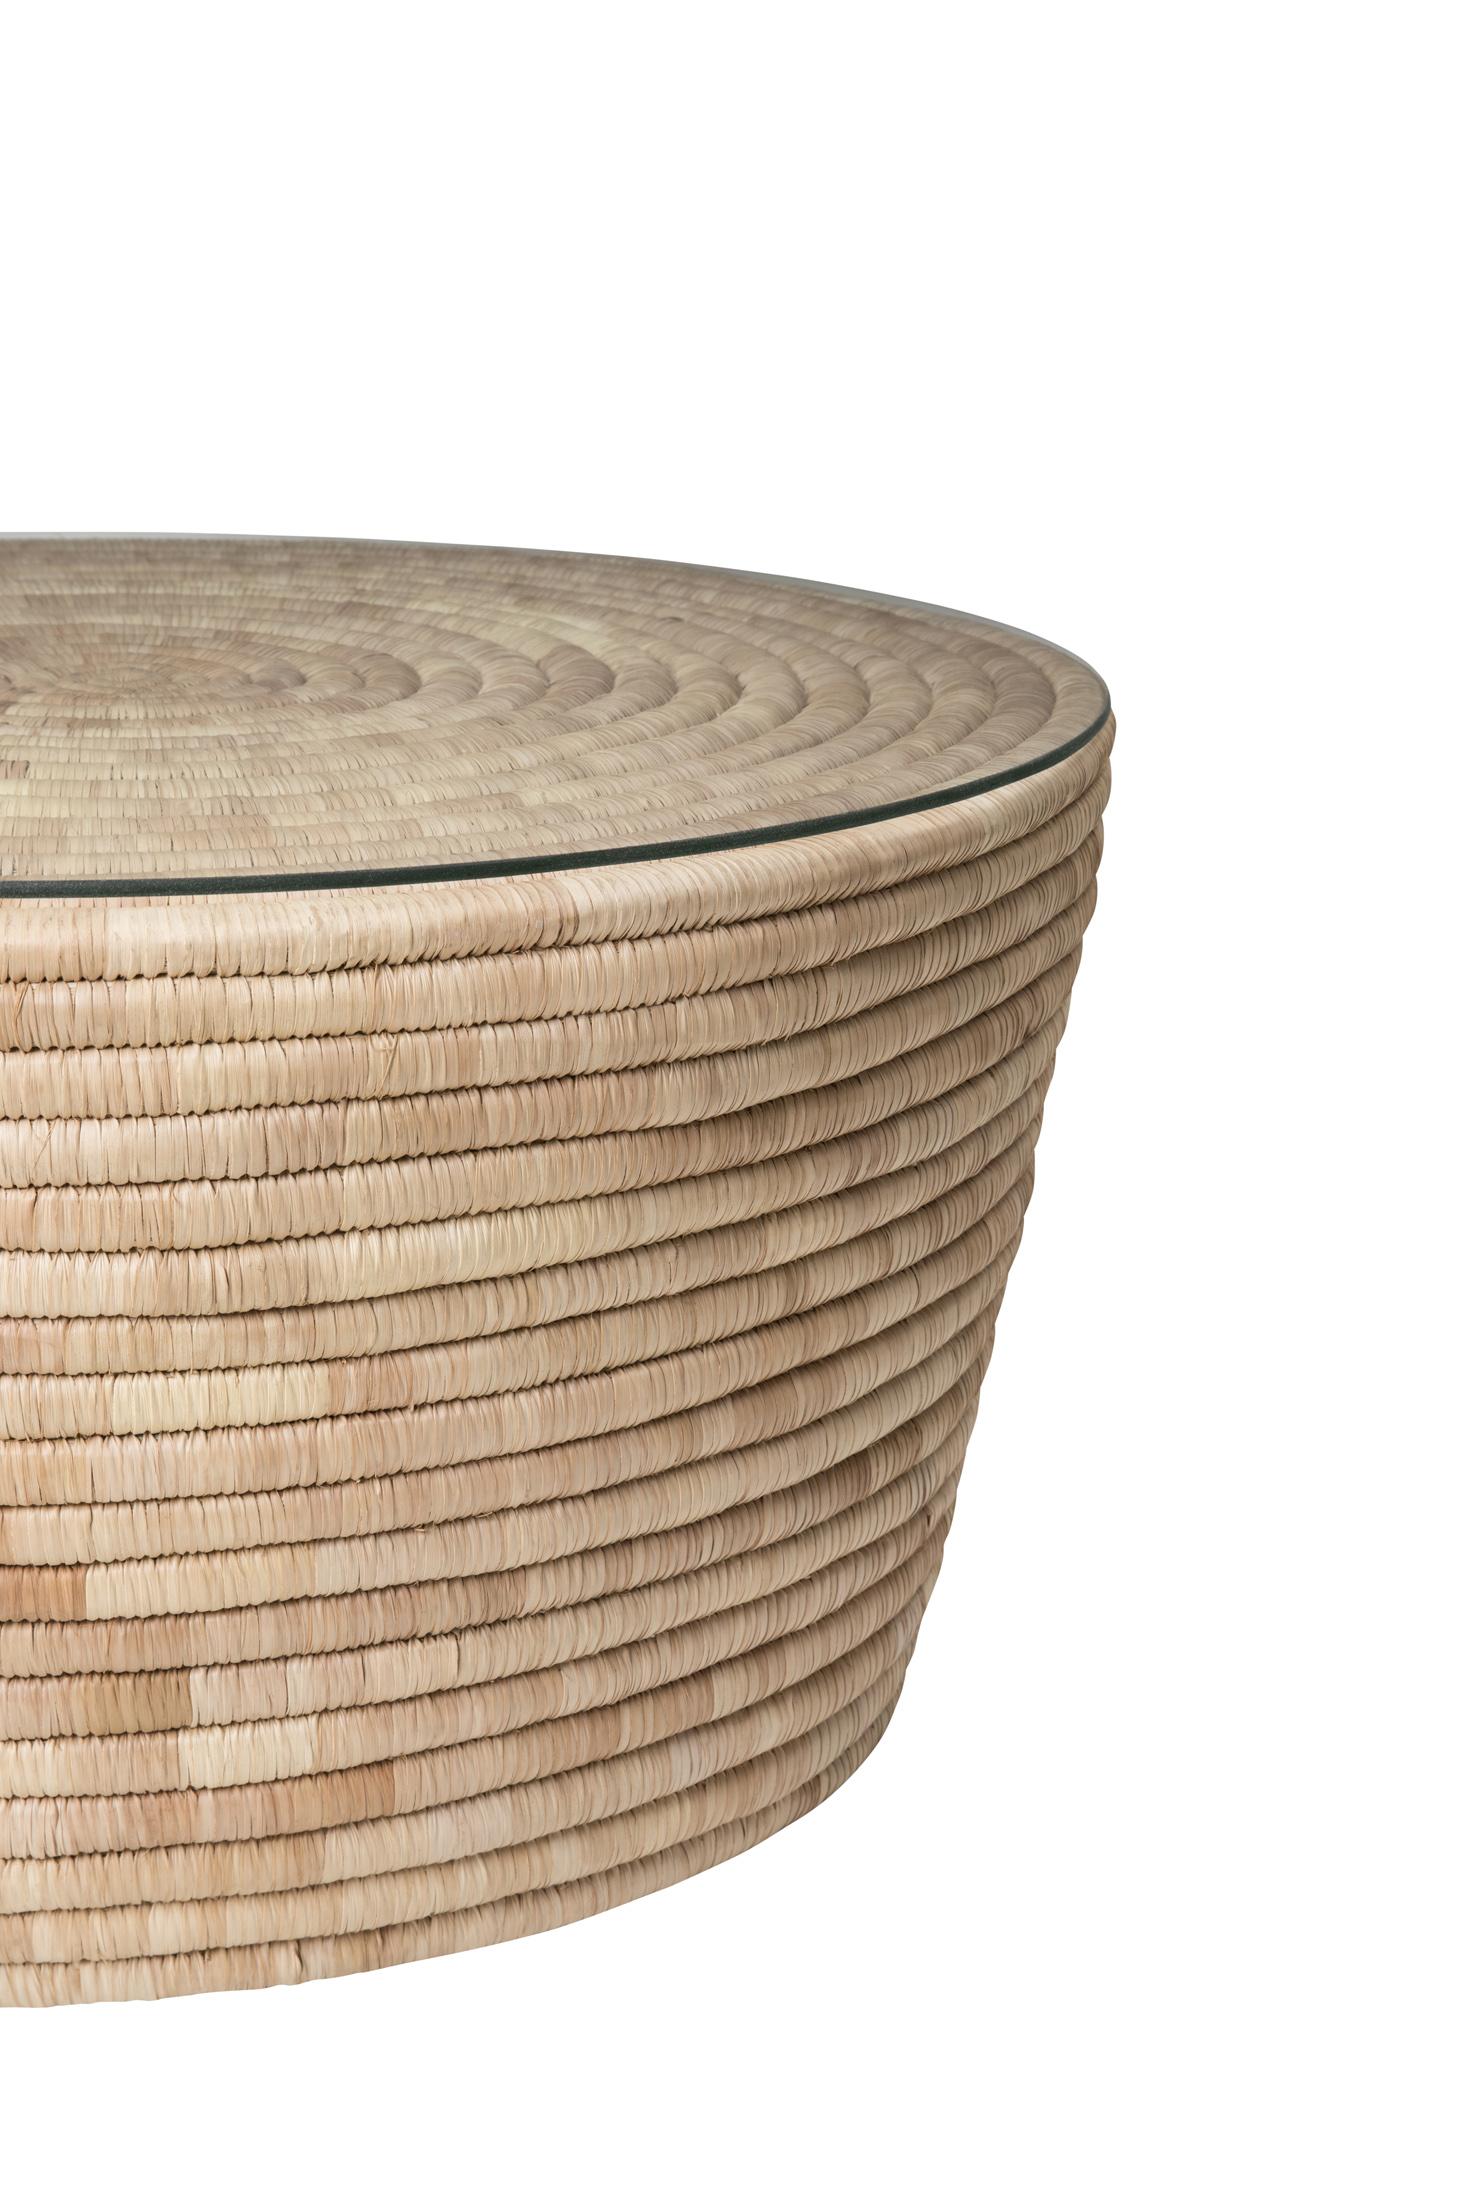 Malawian Palm Coffee Table - Natural